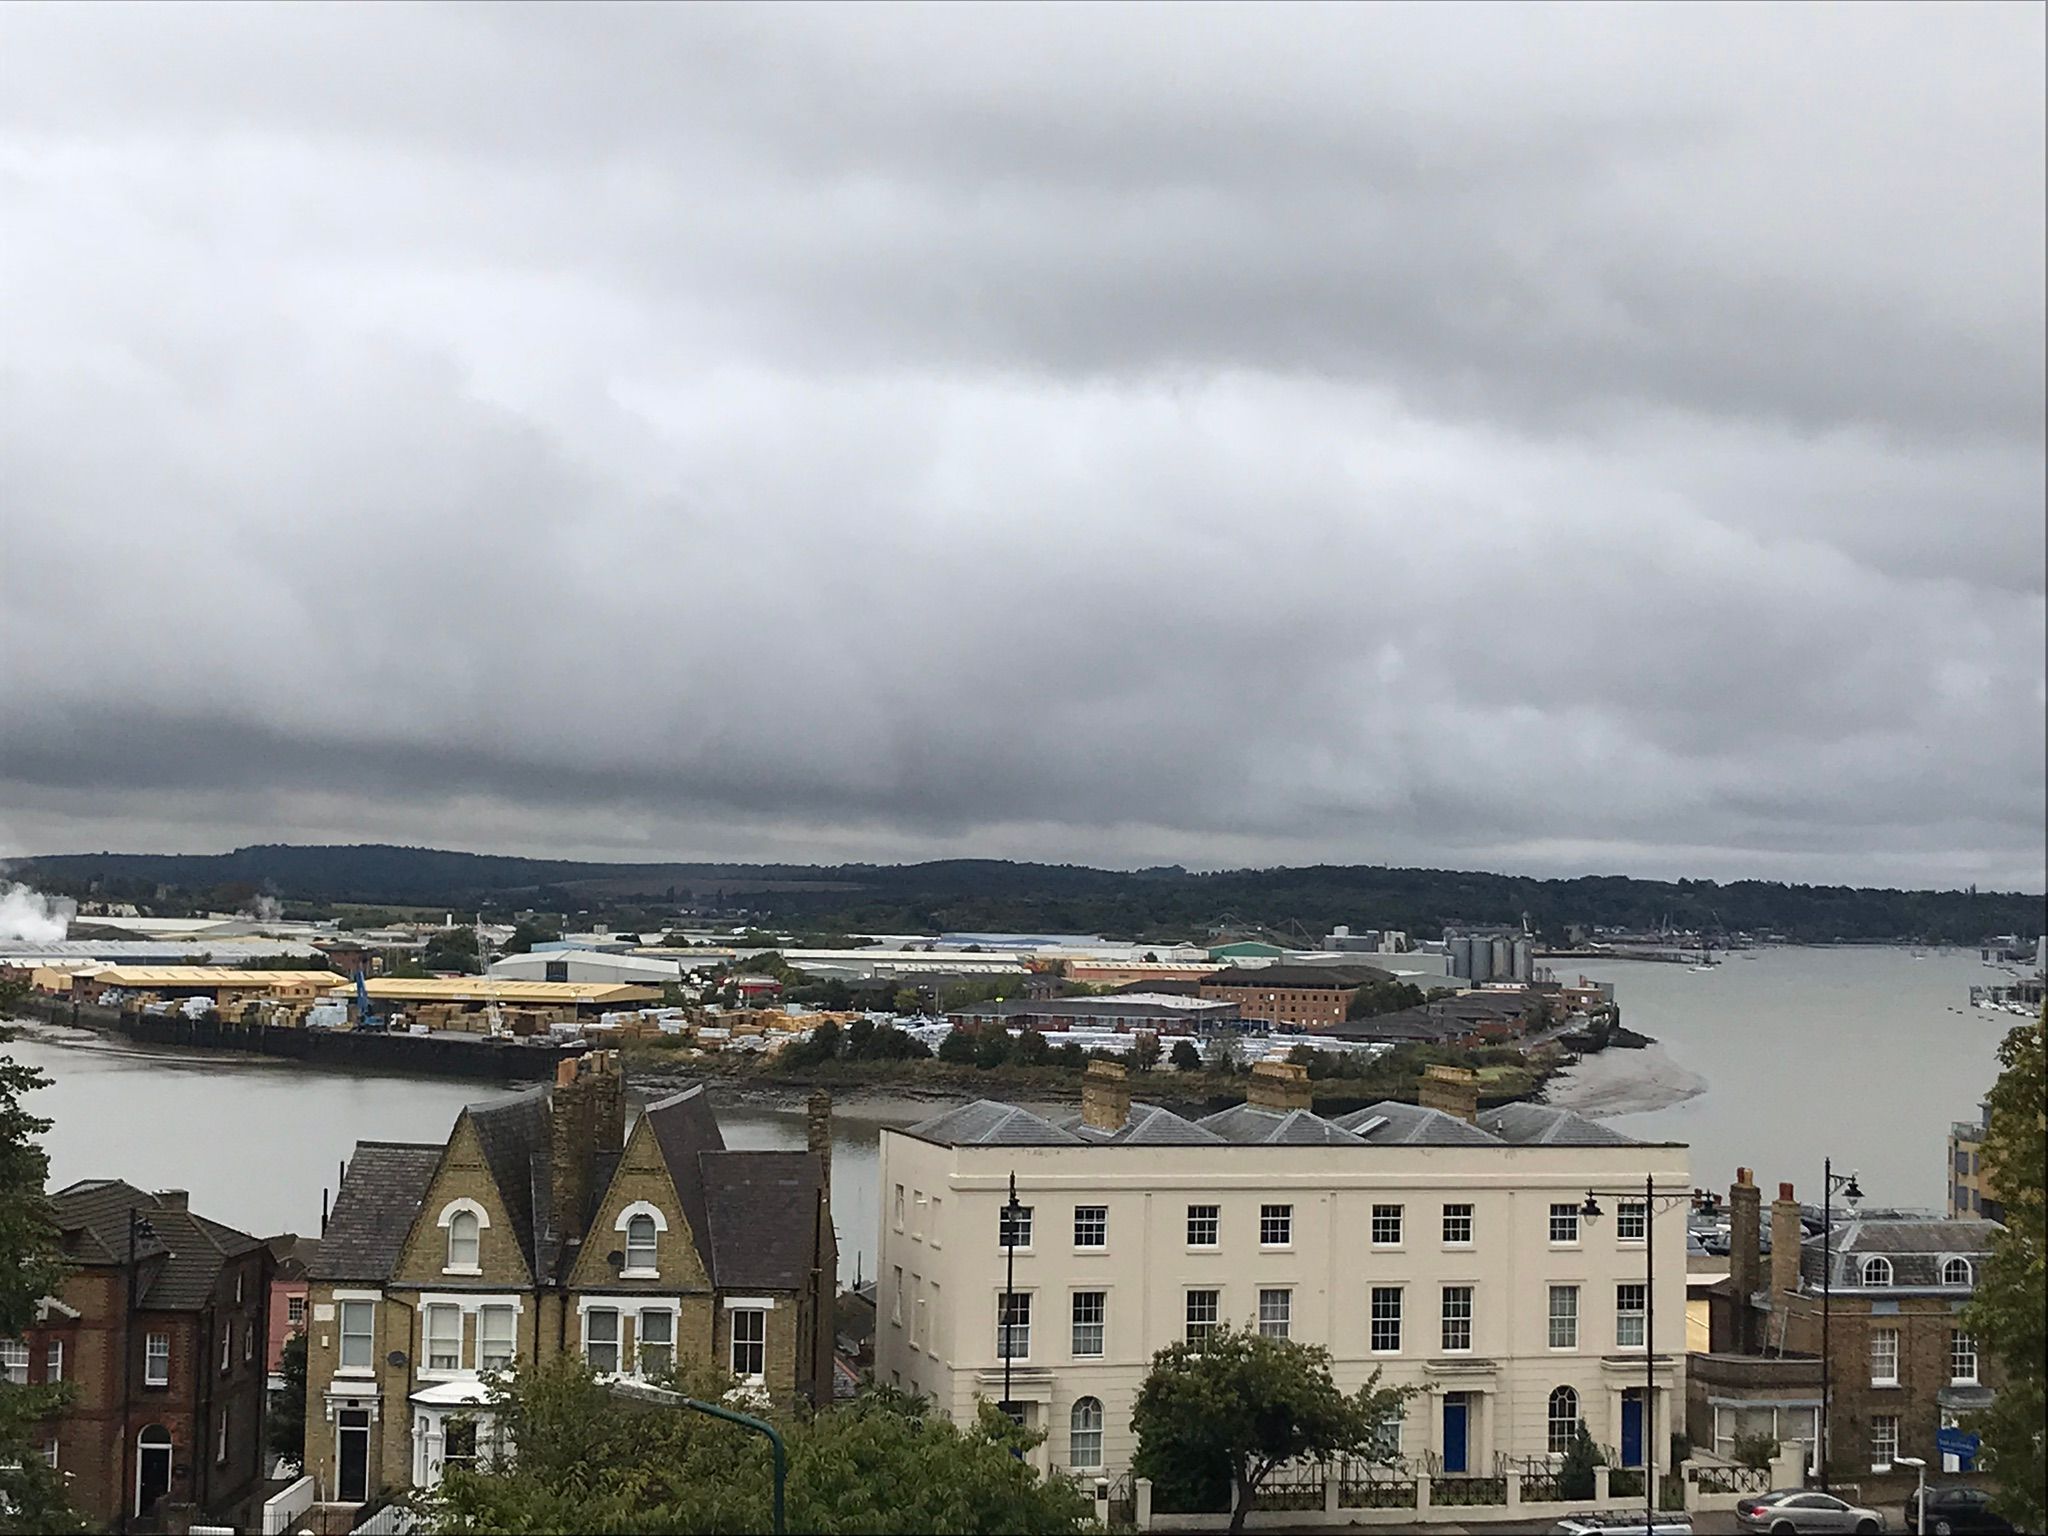 View from the top of the hill at Victoria Gardens, looing out over the River Medway